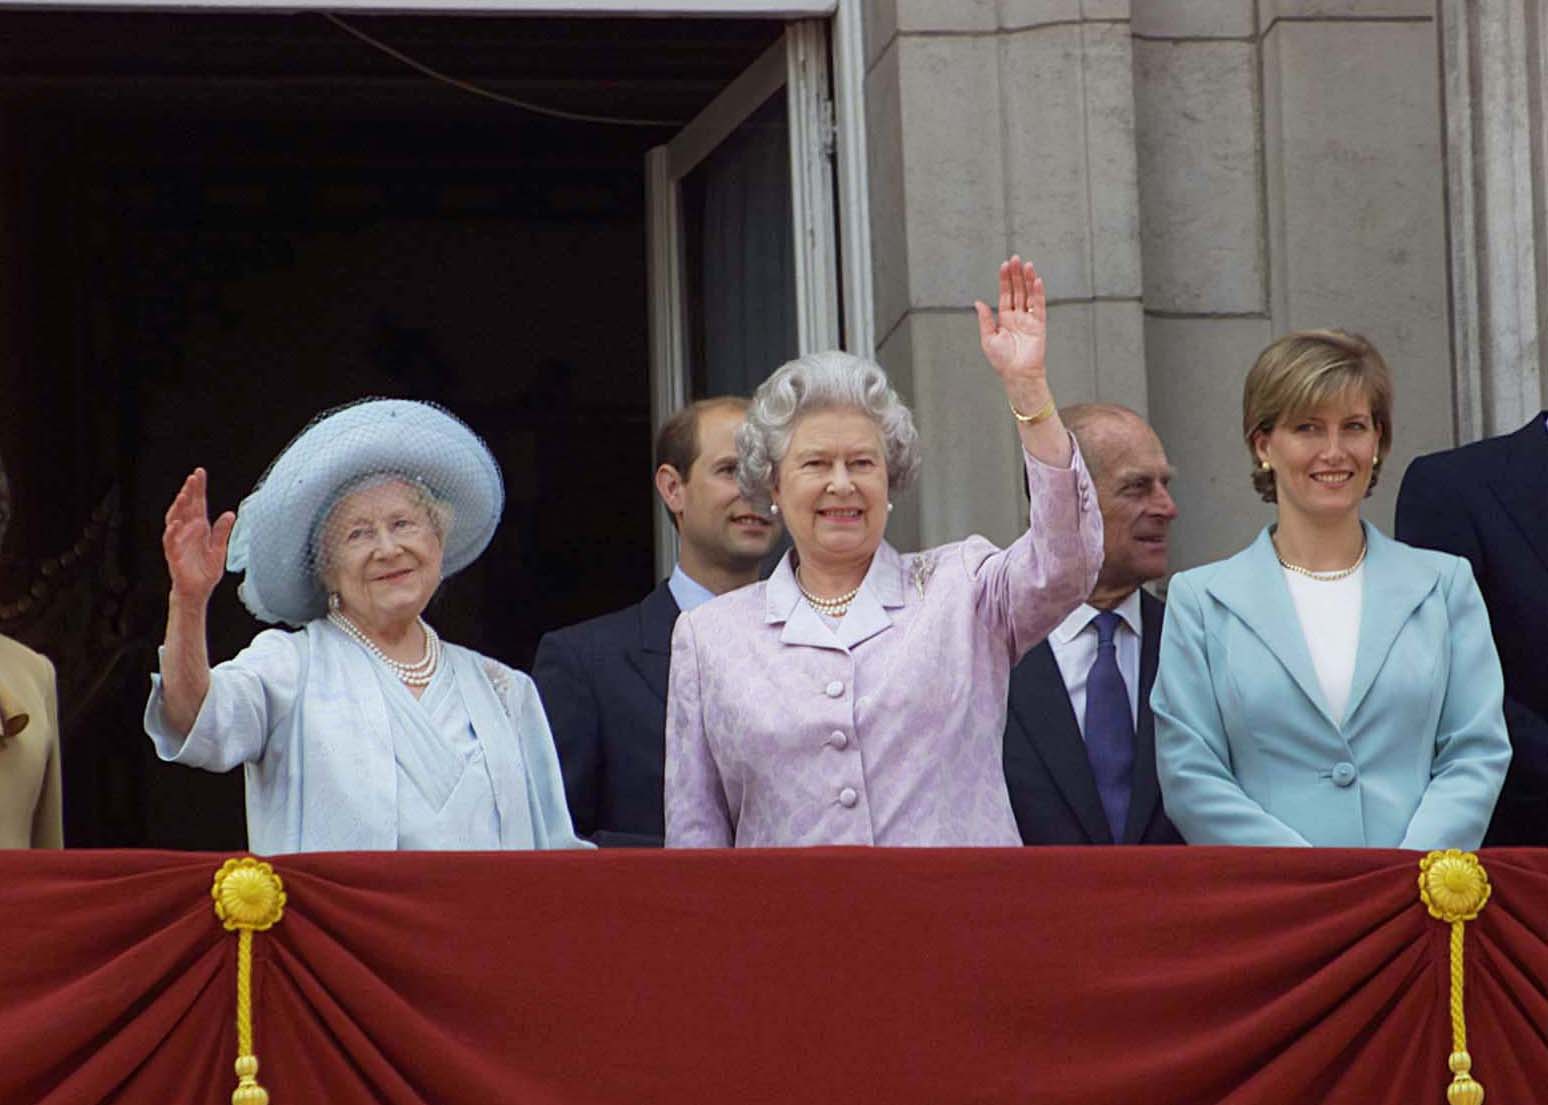 Britain's Queen Mother (L, blue hat & dress) celebrating her 100th birthday with daughter Queen Elizabeth II (C, in lavender), Prince Edward (C, obscured) w. wife Sophie, Countess of Wessex (R) in green & Prince Philip (2R) at Buckingham Palace. August 4, 2000 | Source: Getty Images 